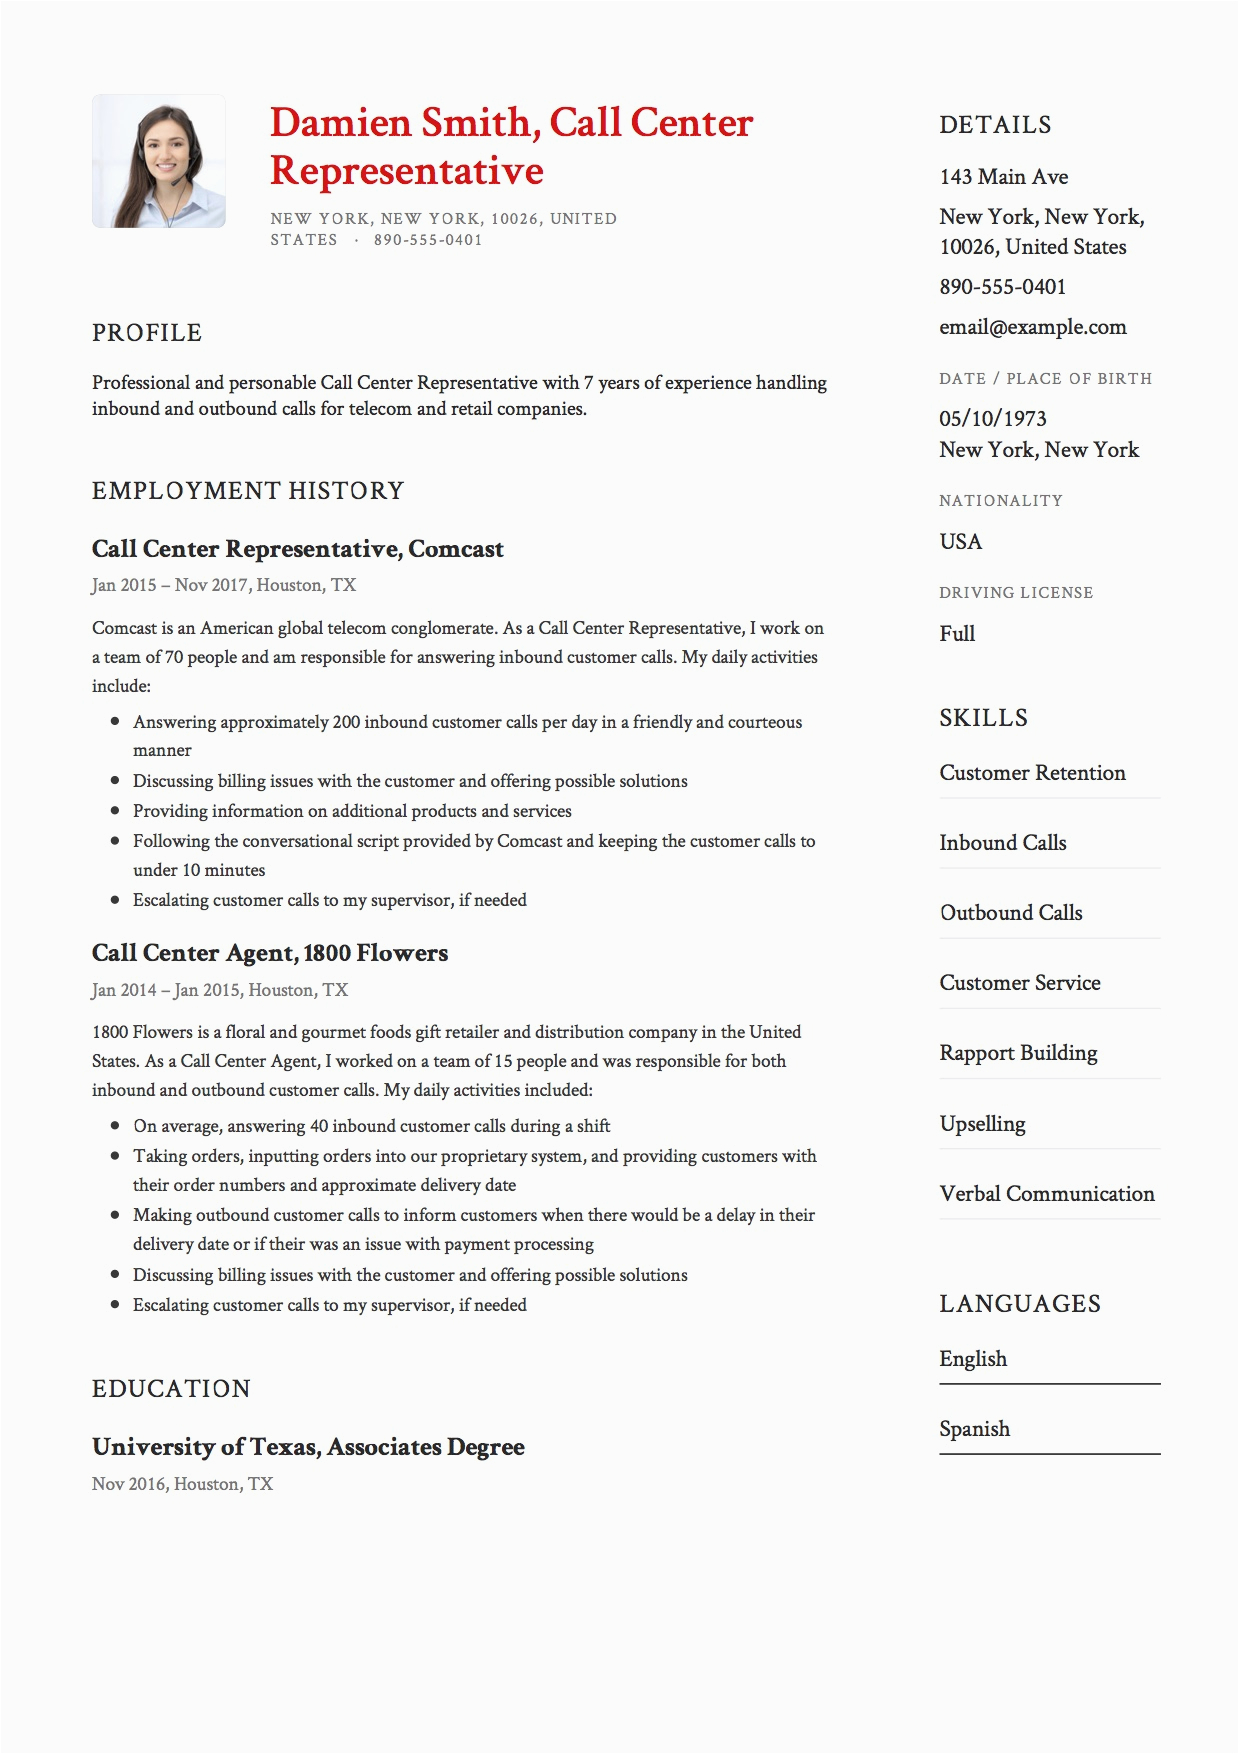 Simple Resume Sample for Call Center Agent without Experience Resume Sample for Call Center Agent Philippines